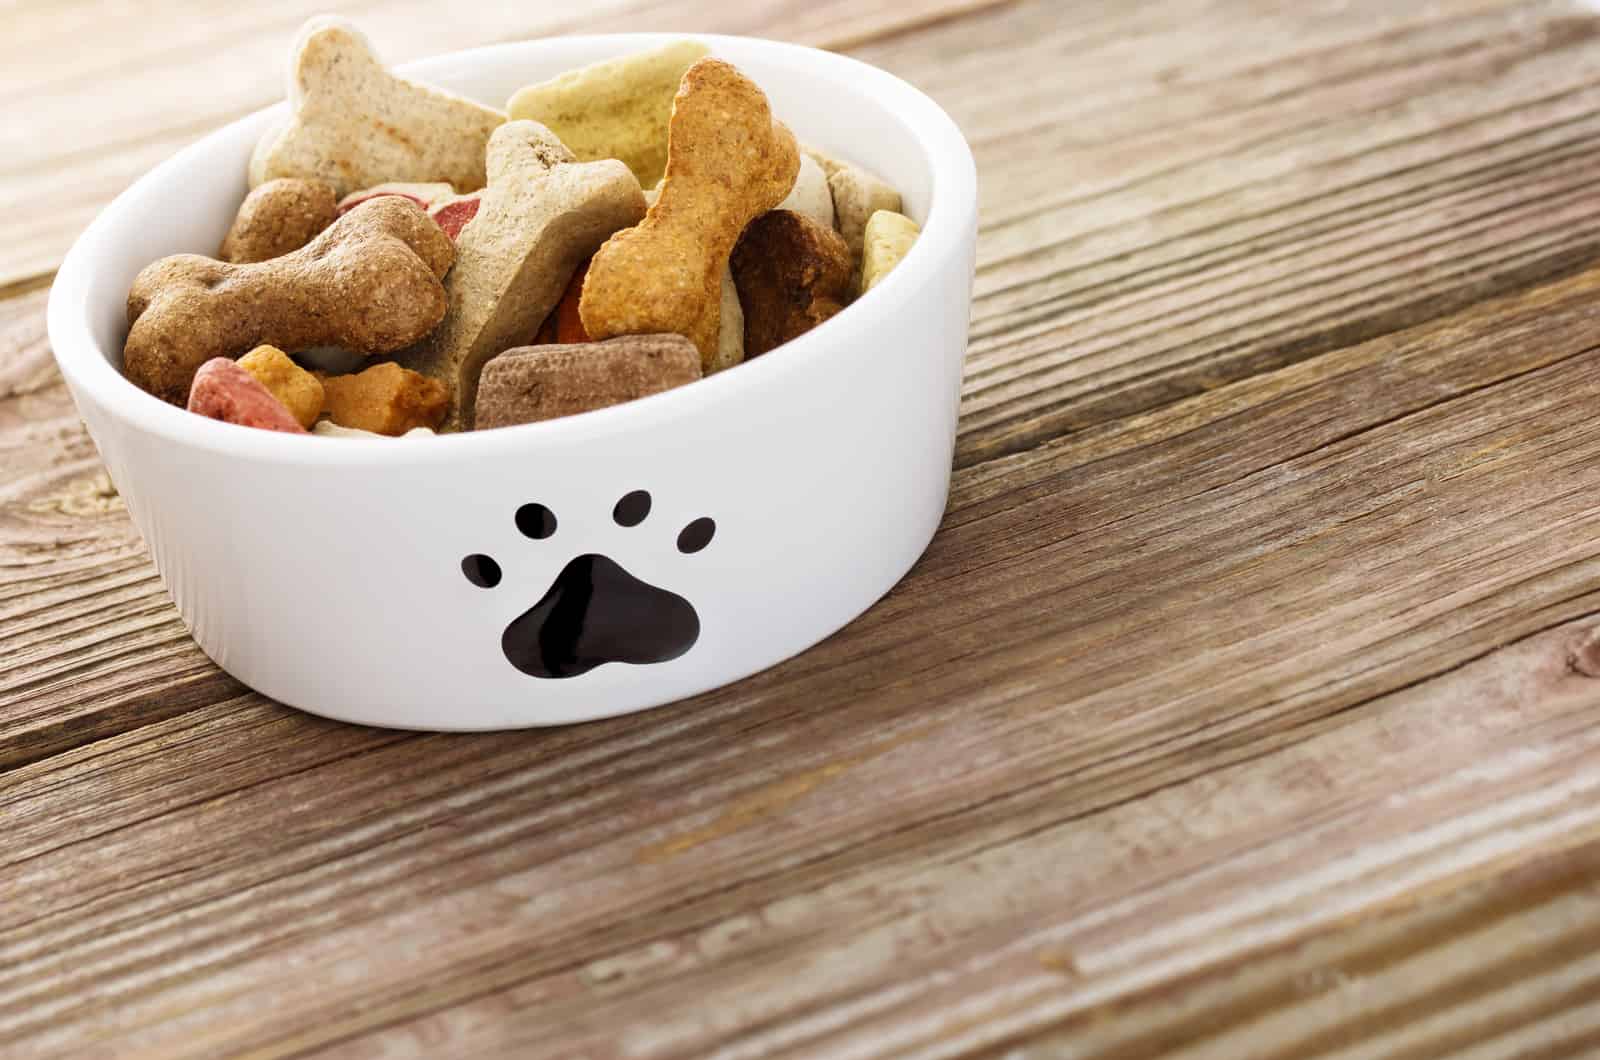 dry dog food in a white bowl 